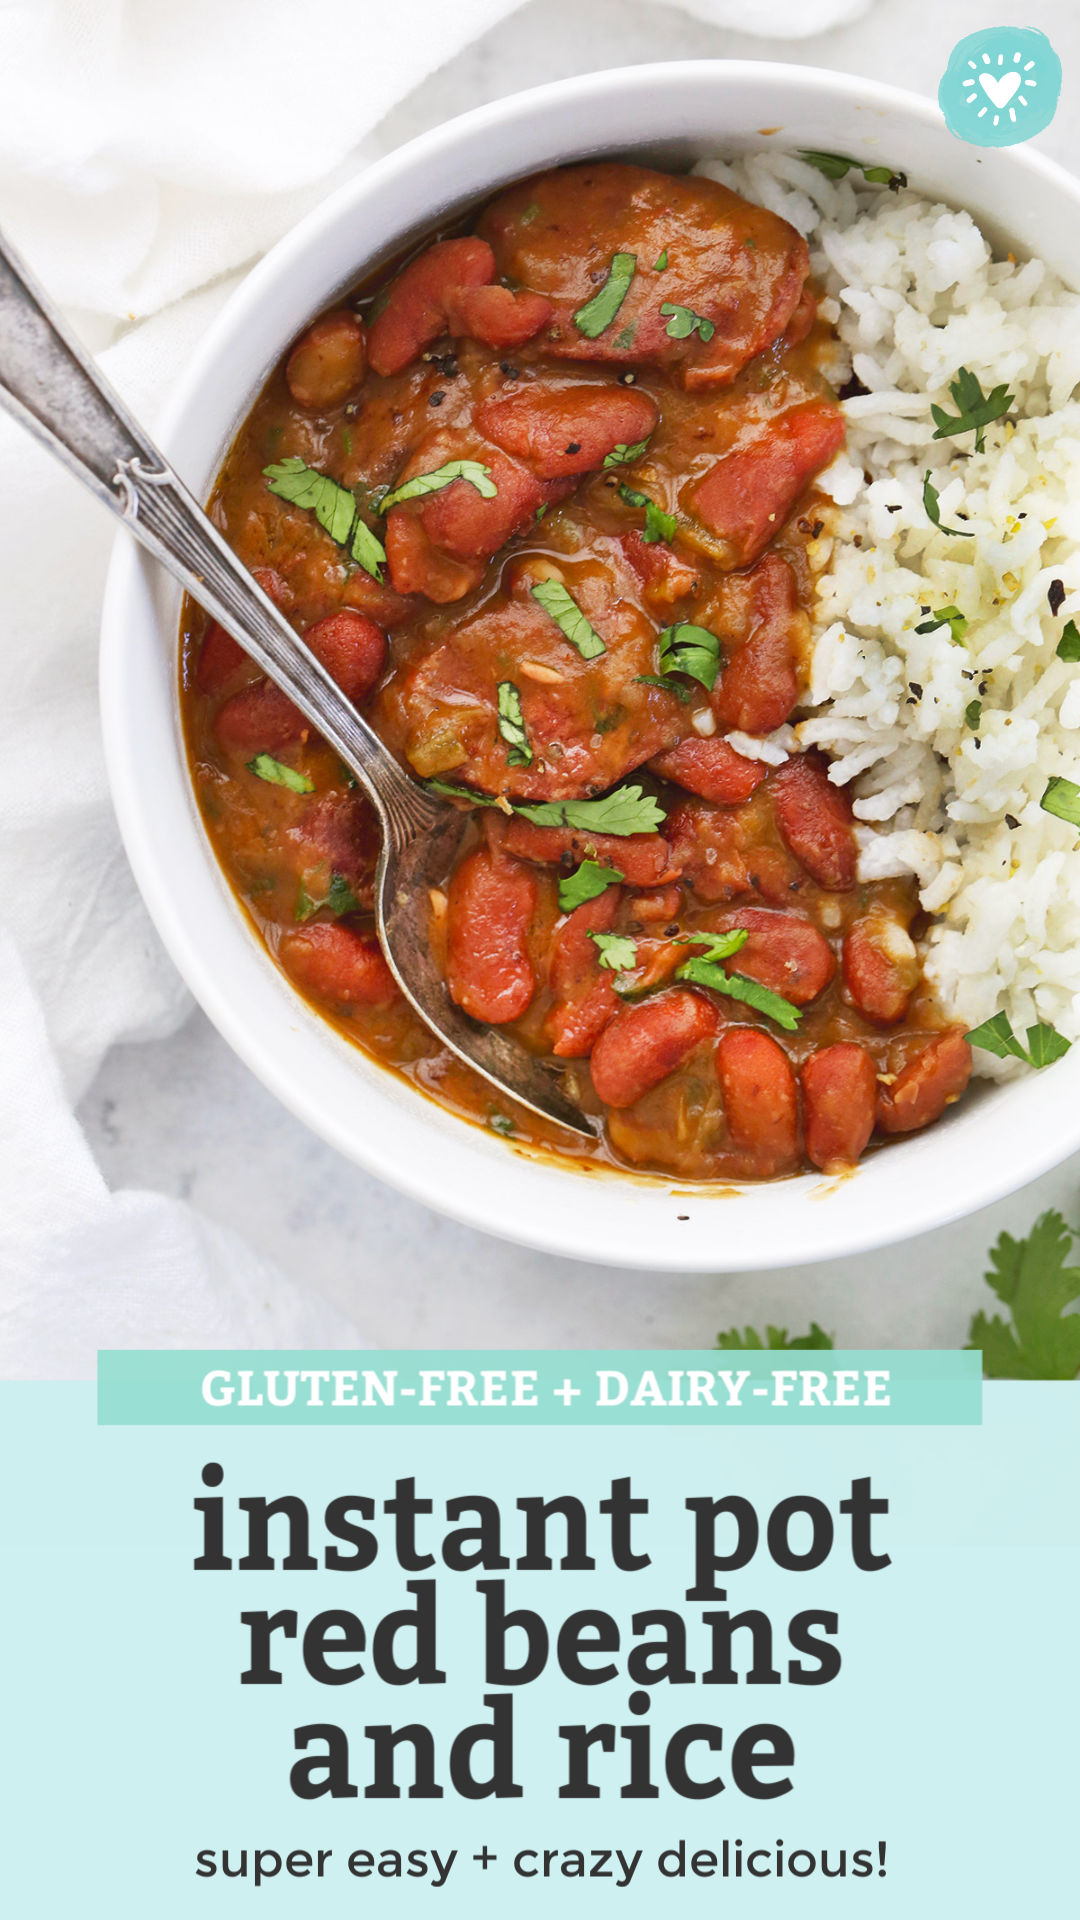 Close view of Instant Pot Red Beans and Rice in a bowl garnished with fresh herbs with text that reads "gluten-free + dairy-free Instant Pot red beans and rice. Super easy + crazy delicious!"